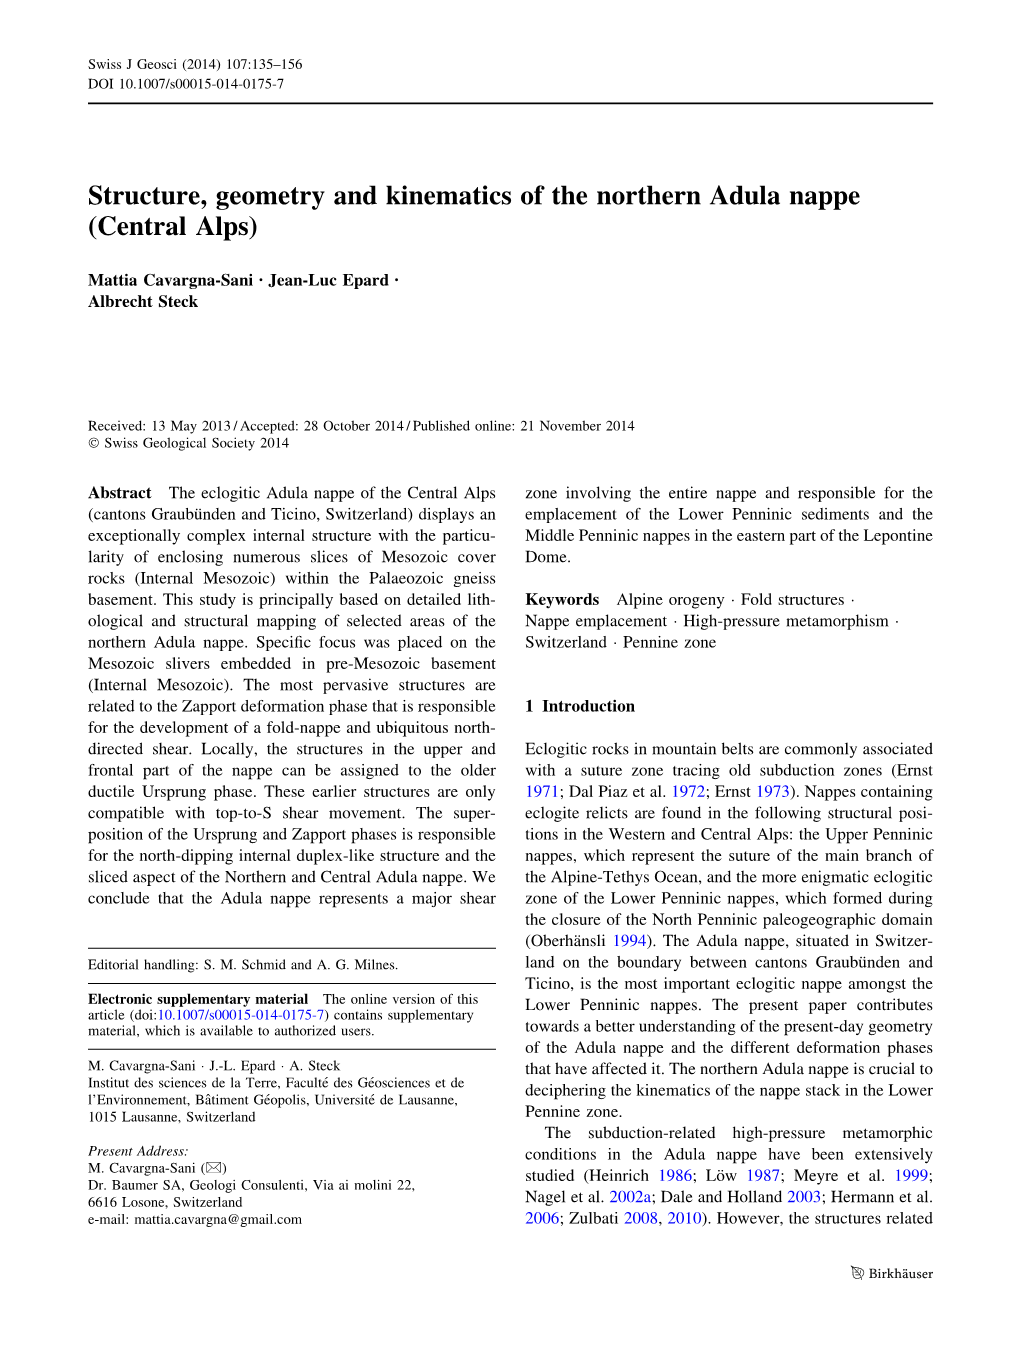 Structure, Geometry and Kinematics of the Northern Adula Nappe (Central Alps)